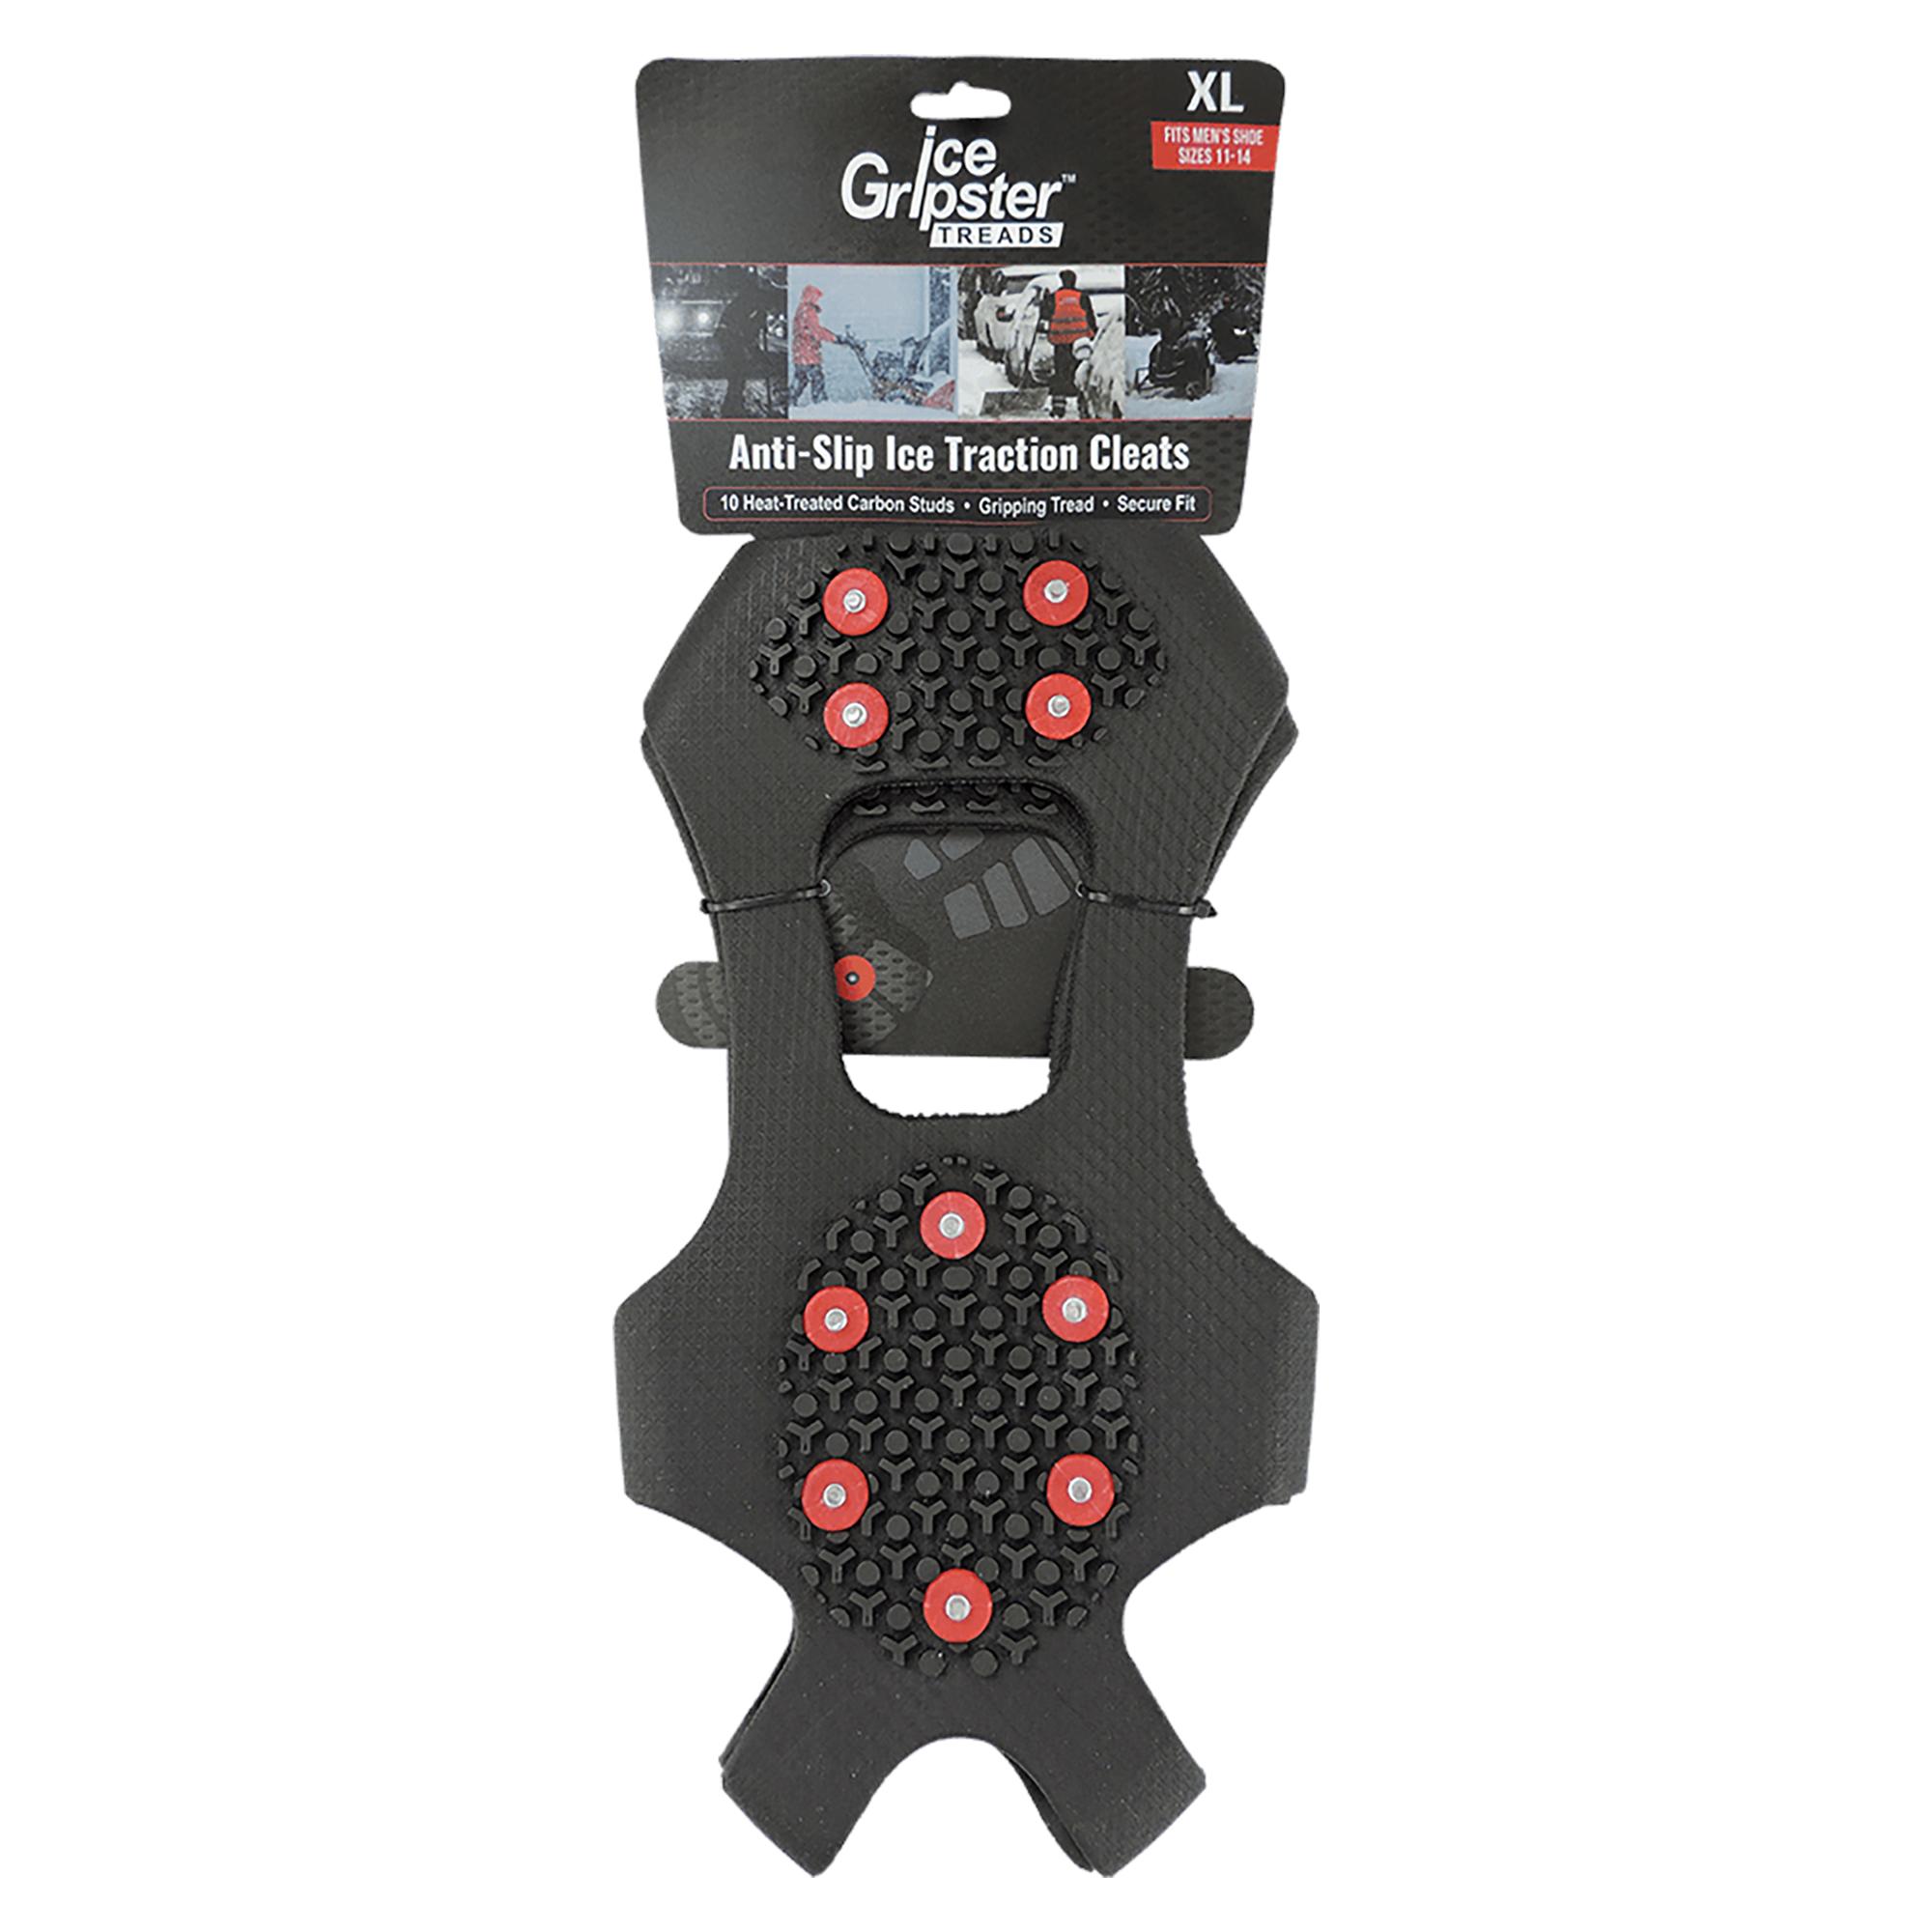 Global Glove ITR3600 Ice Gripster Treads Anti-Slip Foot Traction Cleats  with Carbon Steel Studs